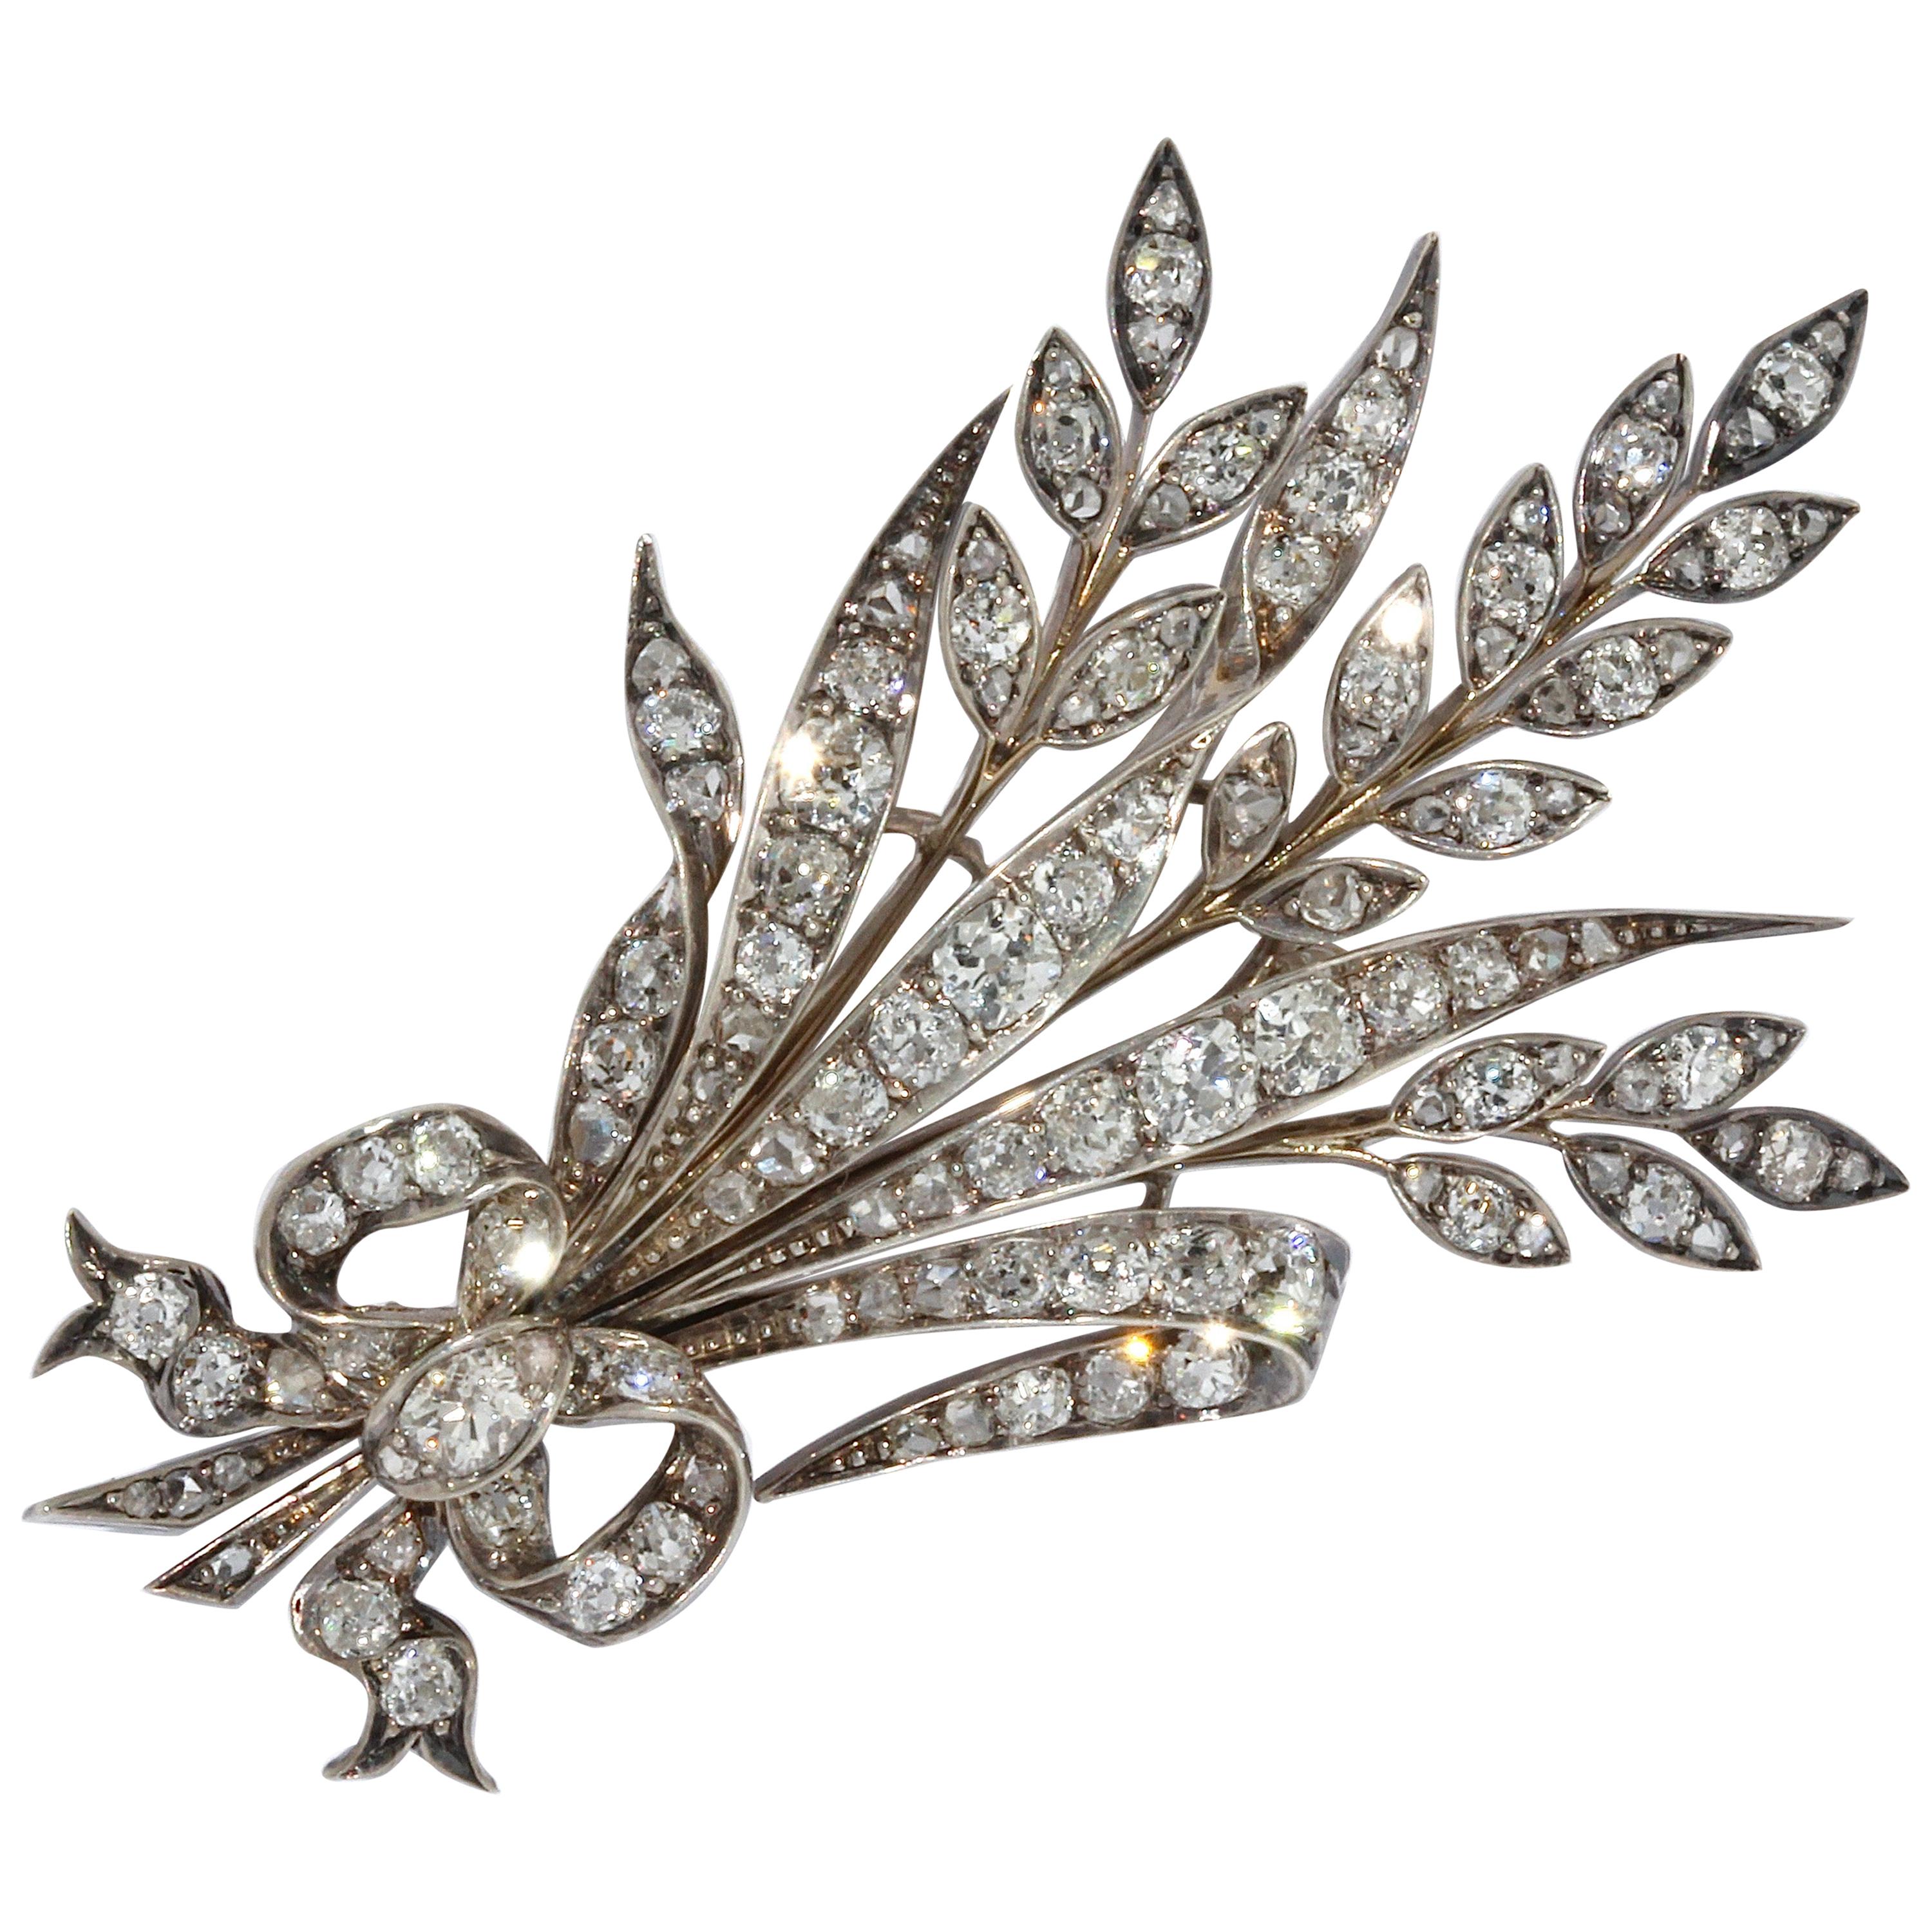 Antique White Gold Diamond Brooch as a Bouquet of Flowers with a Bow